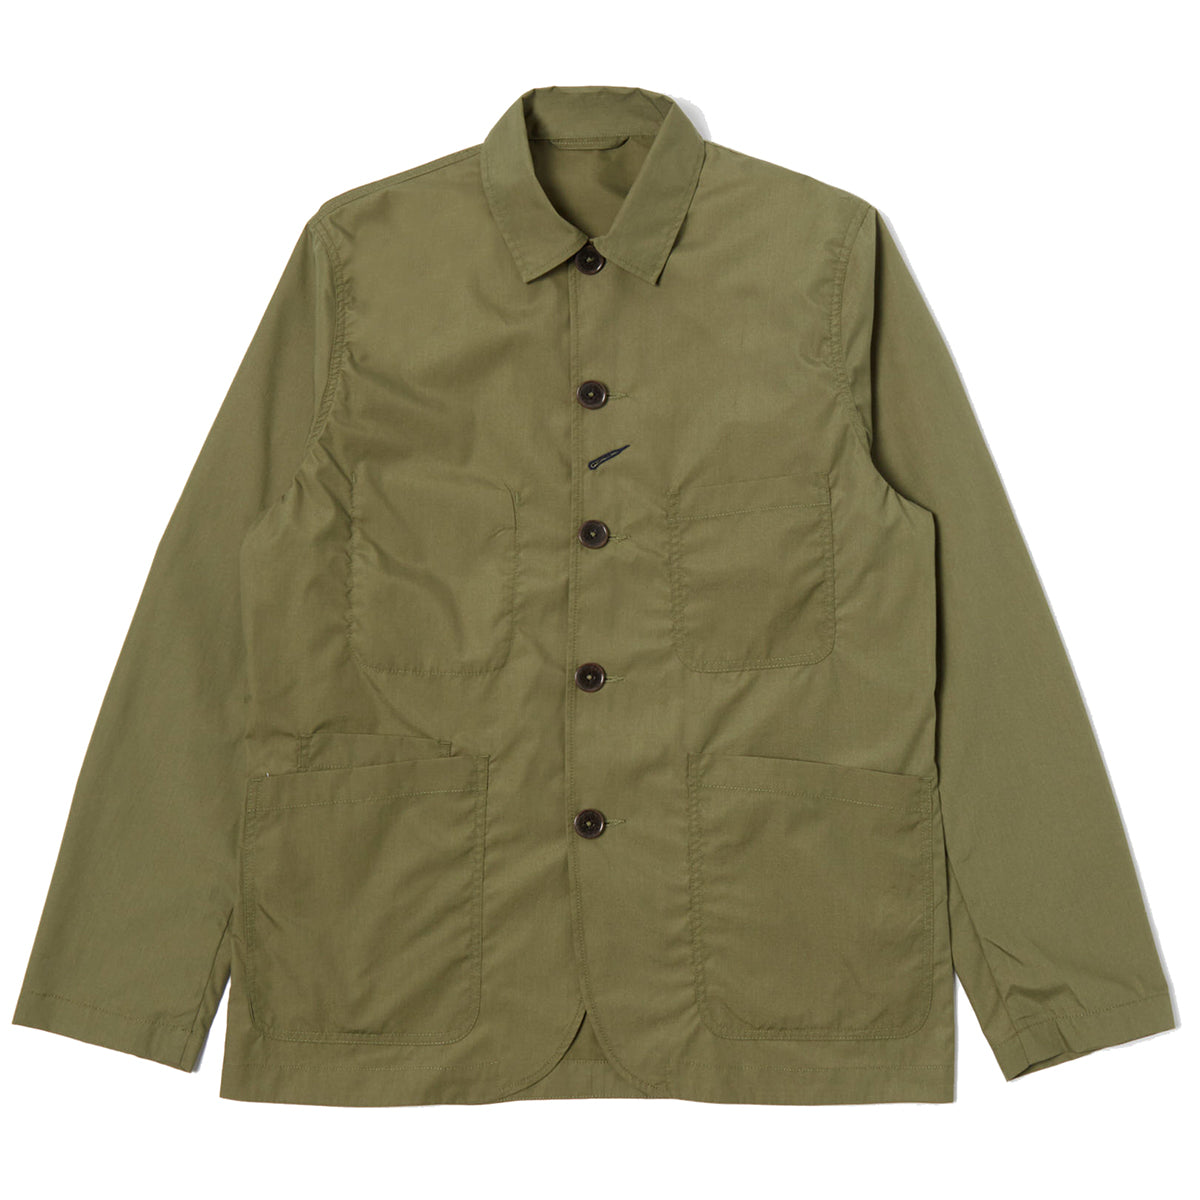 Bakers Jacket - Olive Recycled Poly Tech